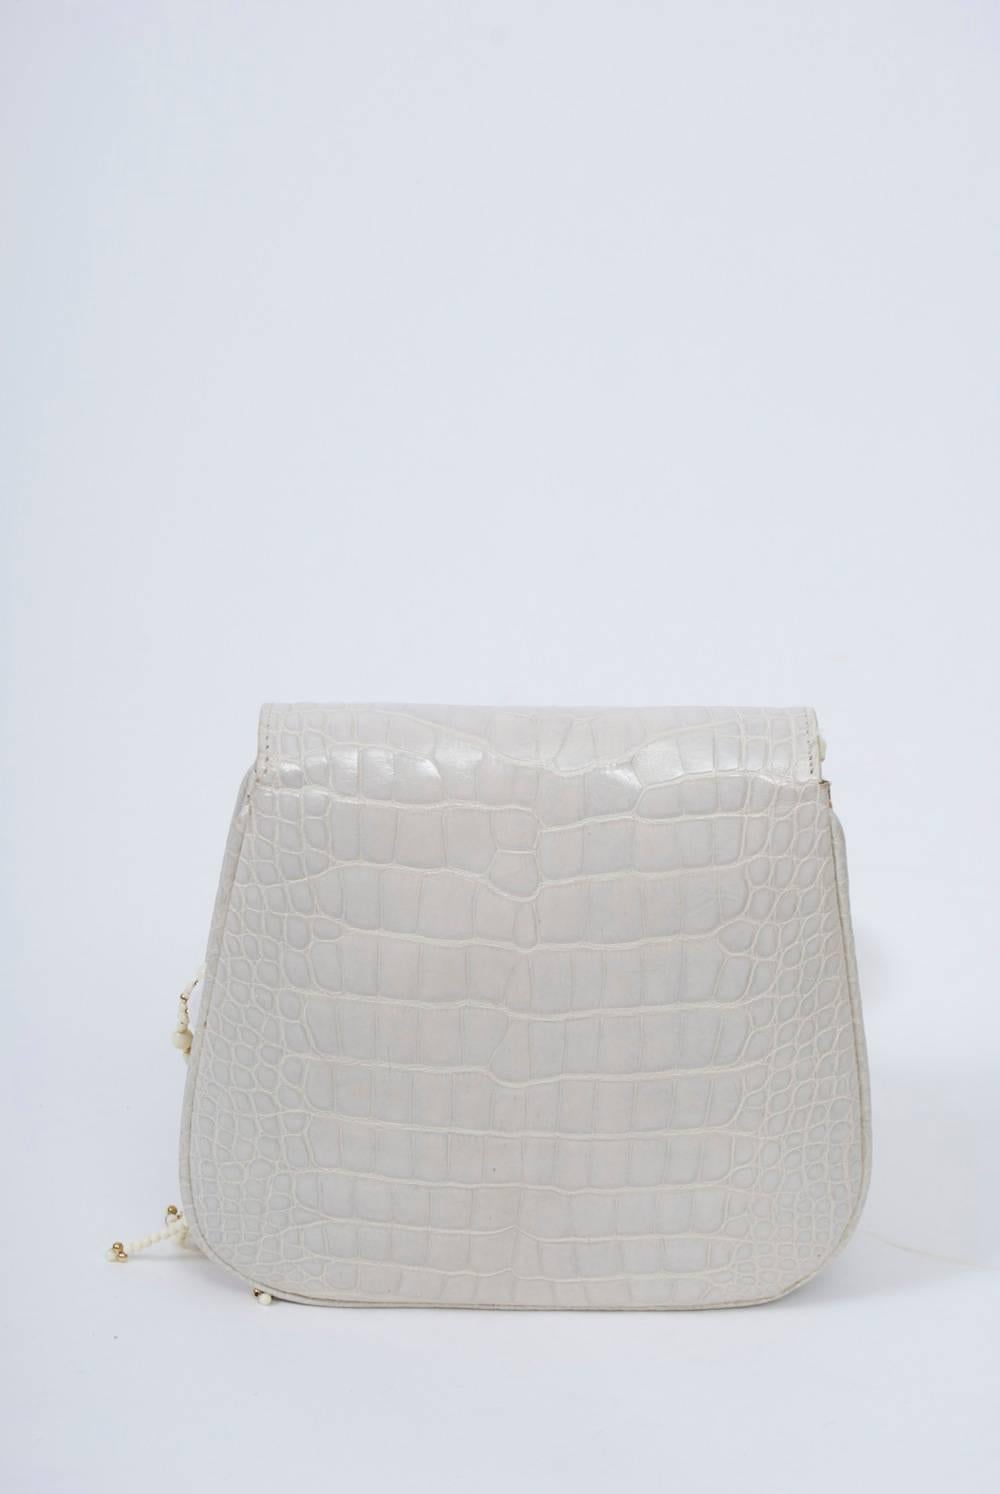 Lana White Alligator Clutch with Two Shoulder Straps In Excellent Condition In Alford, MA